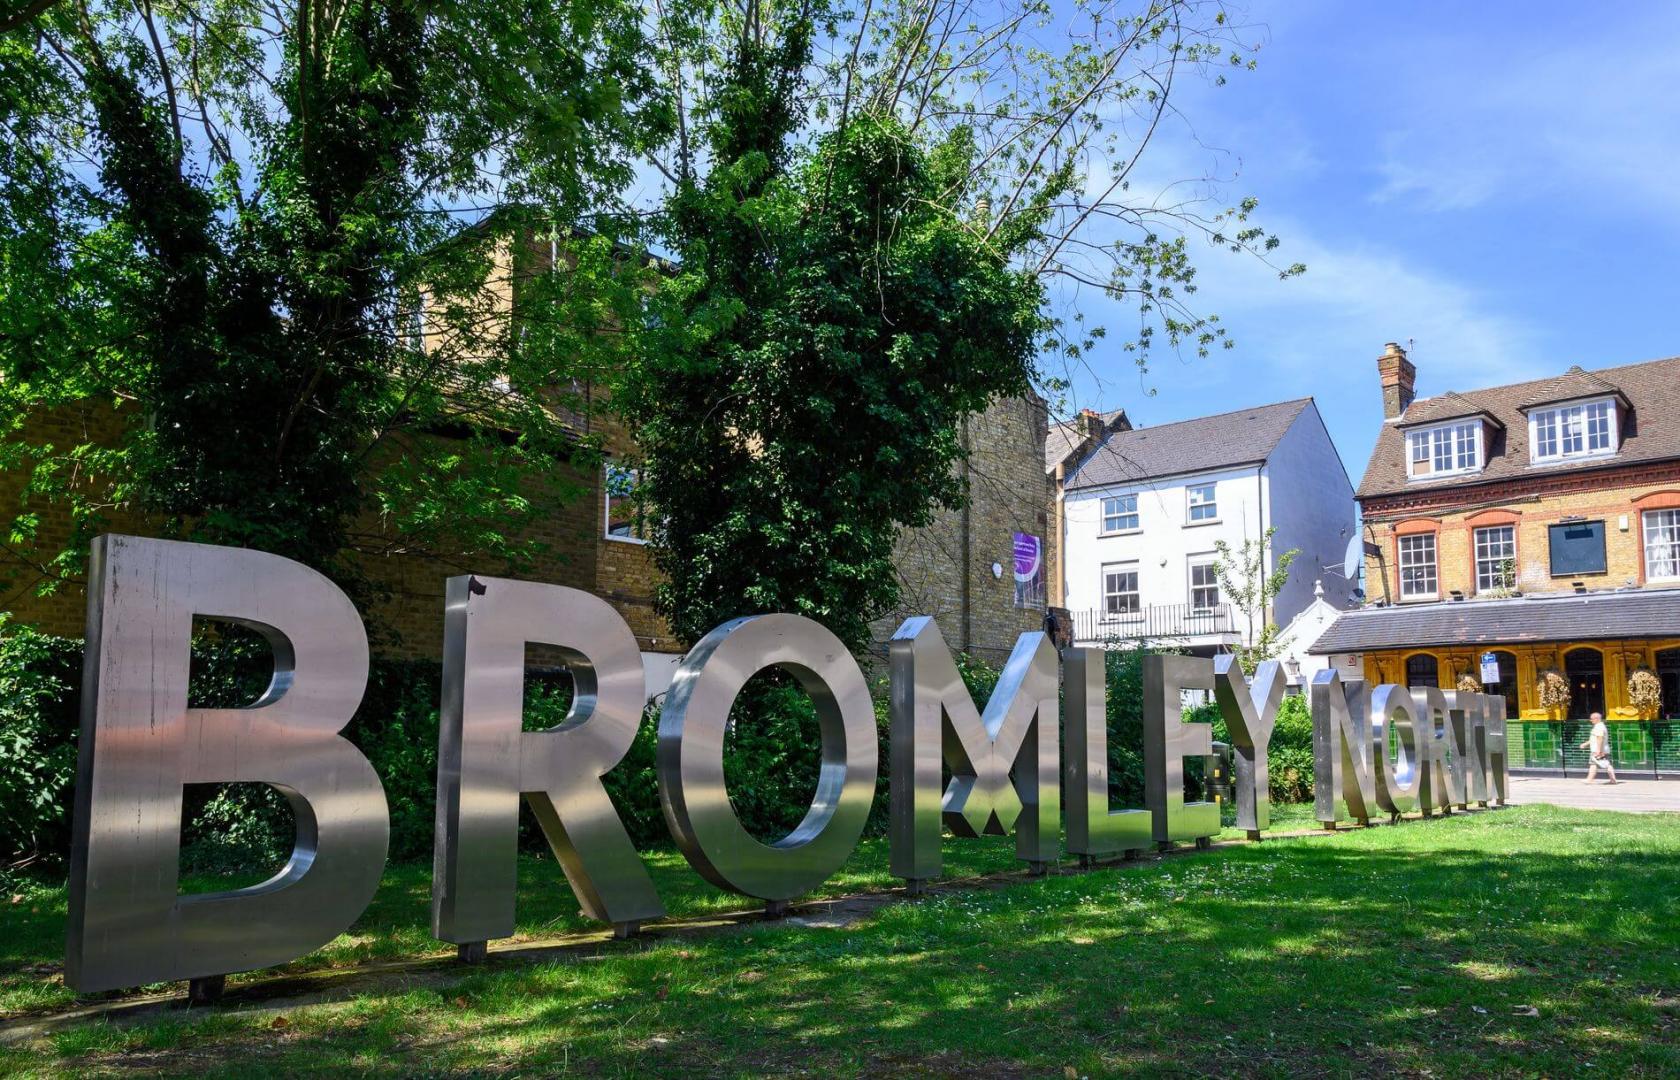 Area Guides for Bromley (1)